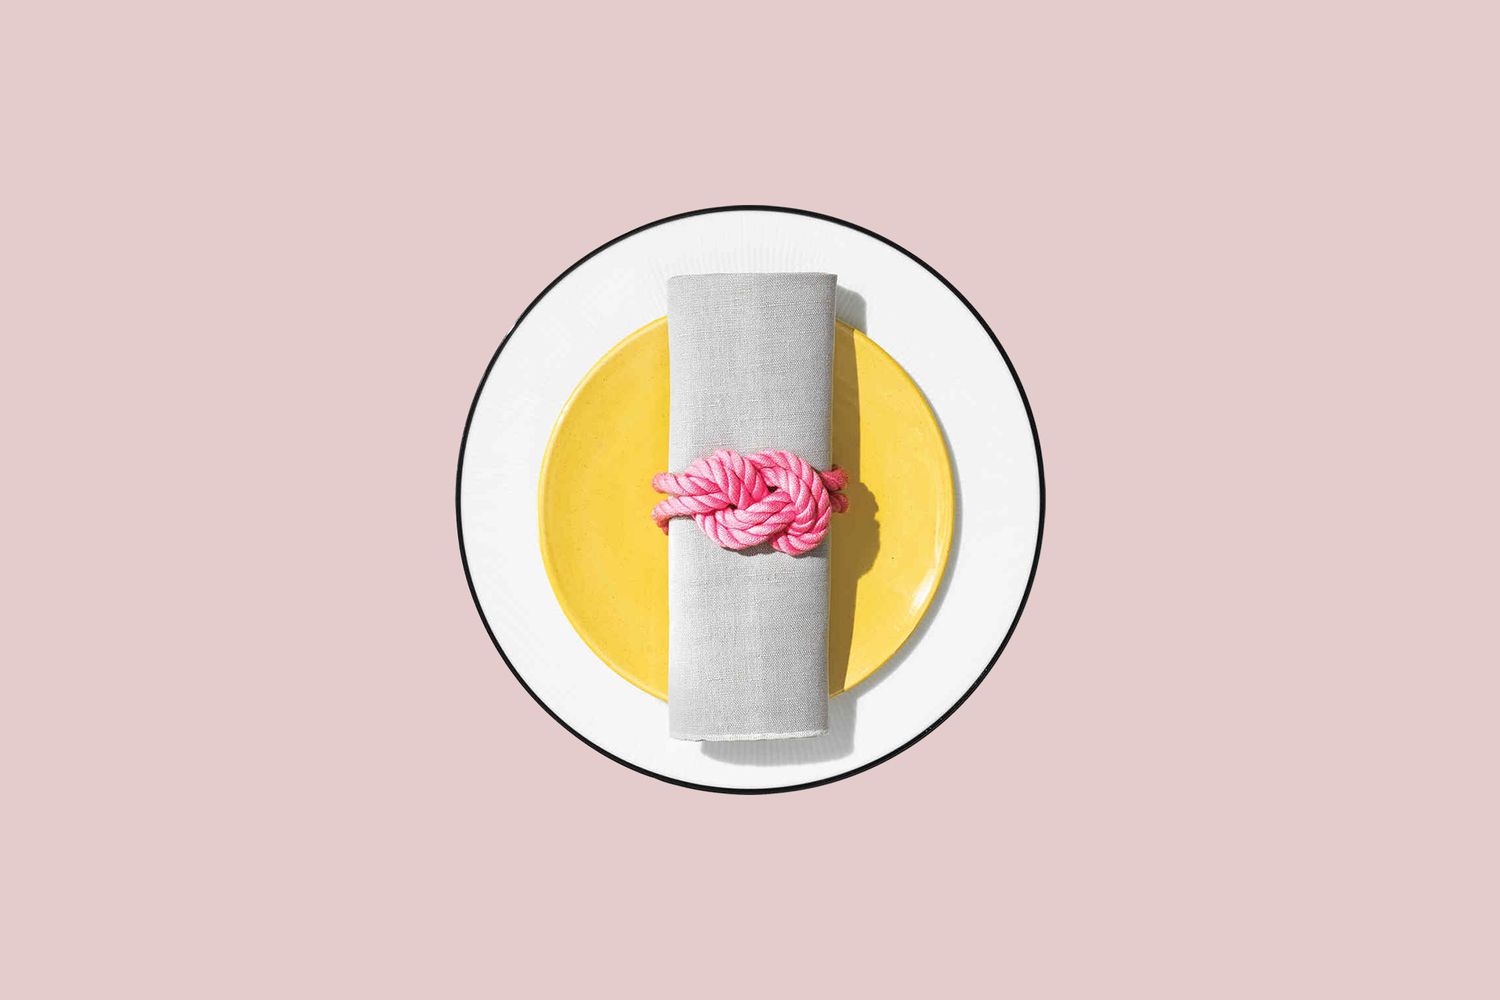 Napkin on plate with rope knot